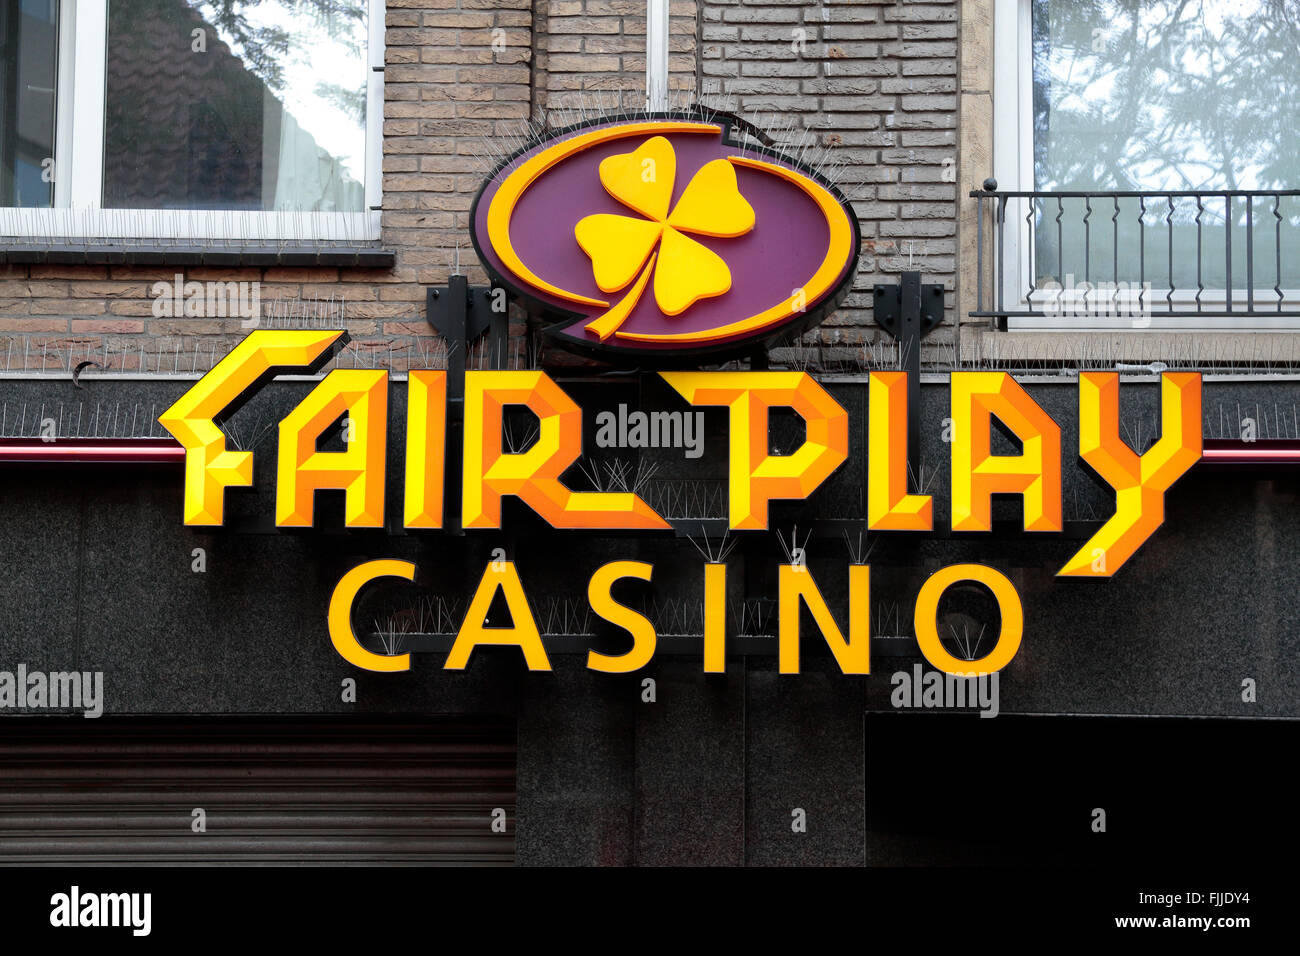 Il Fair Play Casino sign in Eindhoven, Noord-Brabant, Paesi Bassi. Foto Stock